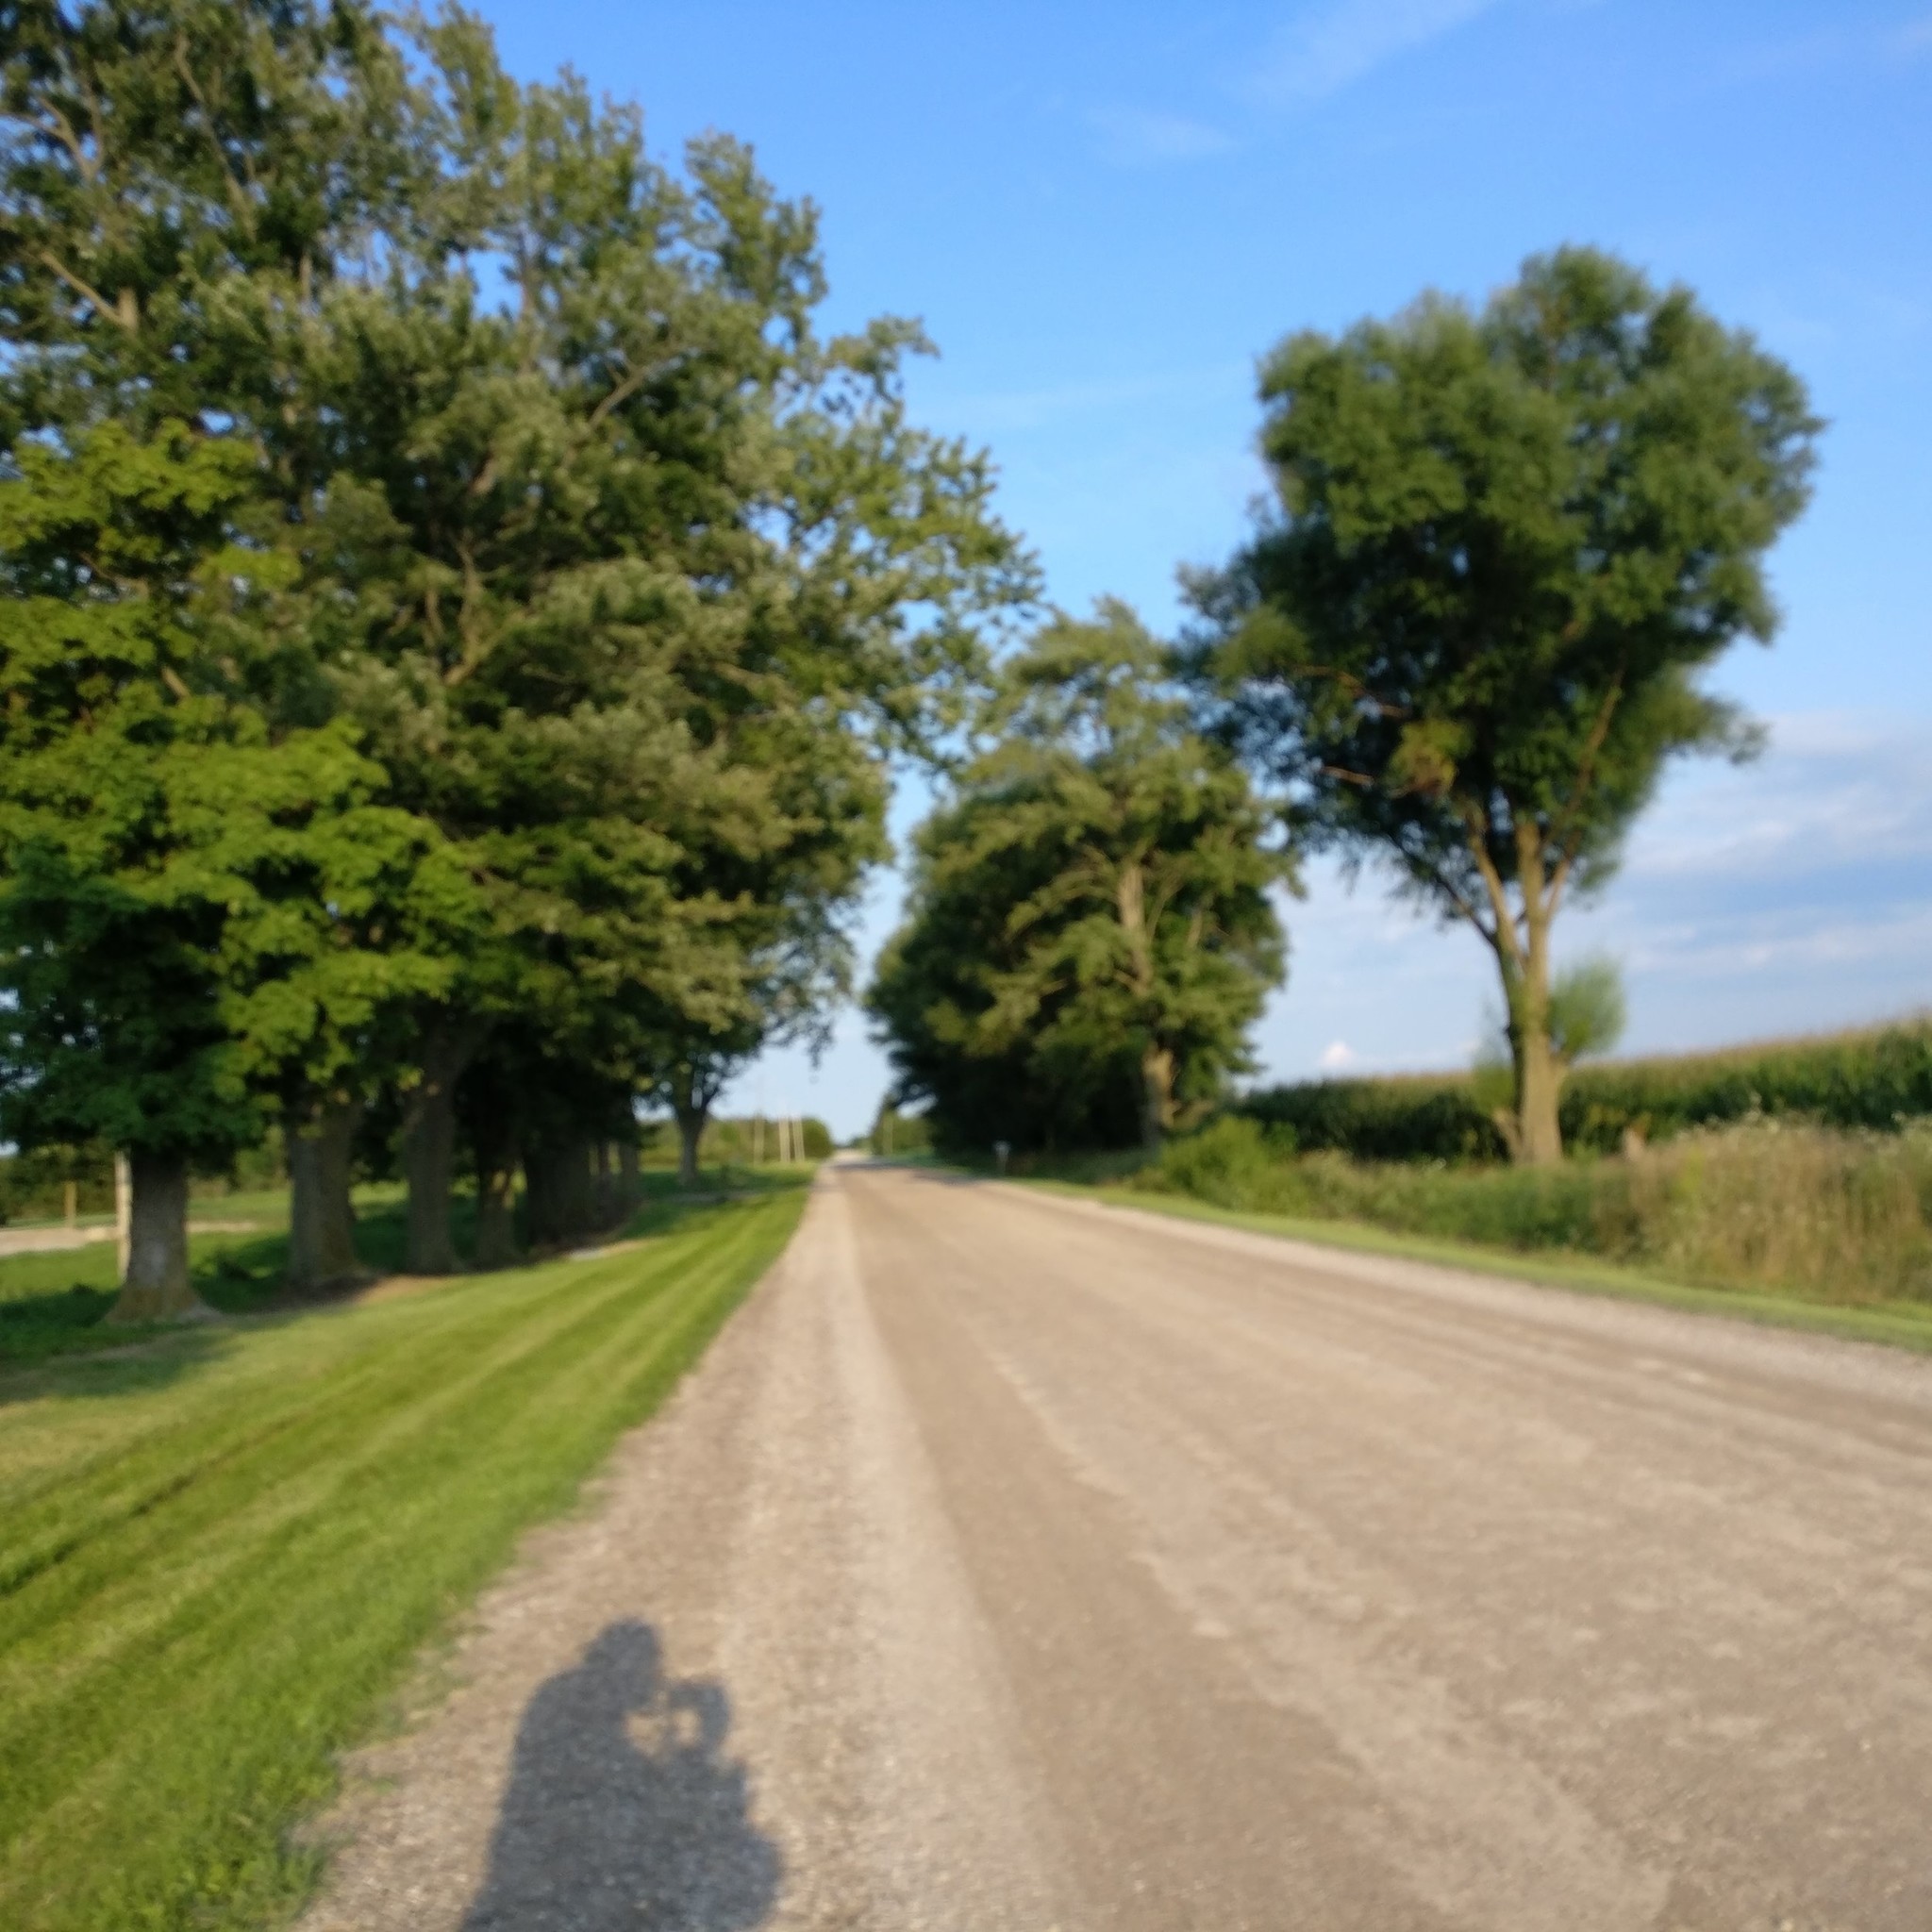 You can see Ben's shadow as he takes a photo of the gravel road ahead